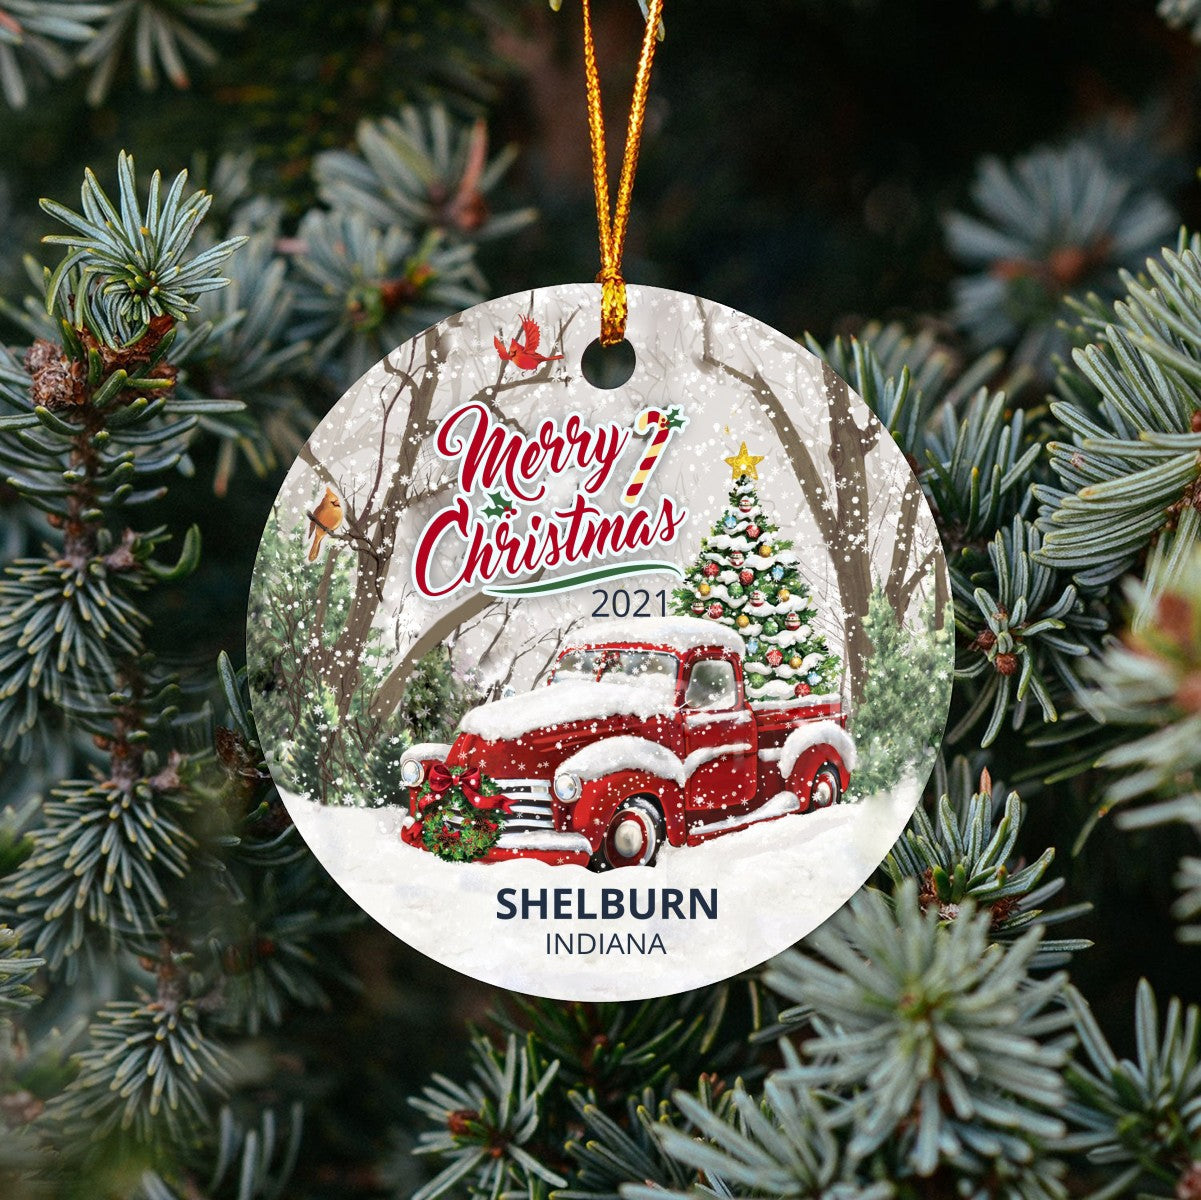 Christmas Tree Ornaments Shelburn - Ornament With Name City, State Shelburn Indiana IN Ornament - Red Truck Xmas Ornaments 3'' Plastic Gift For Family, Friend And Housewarming